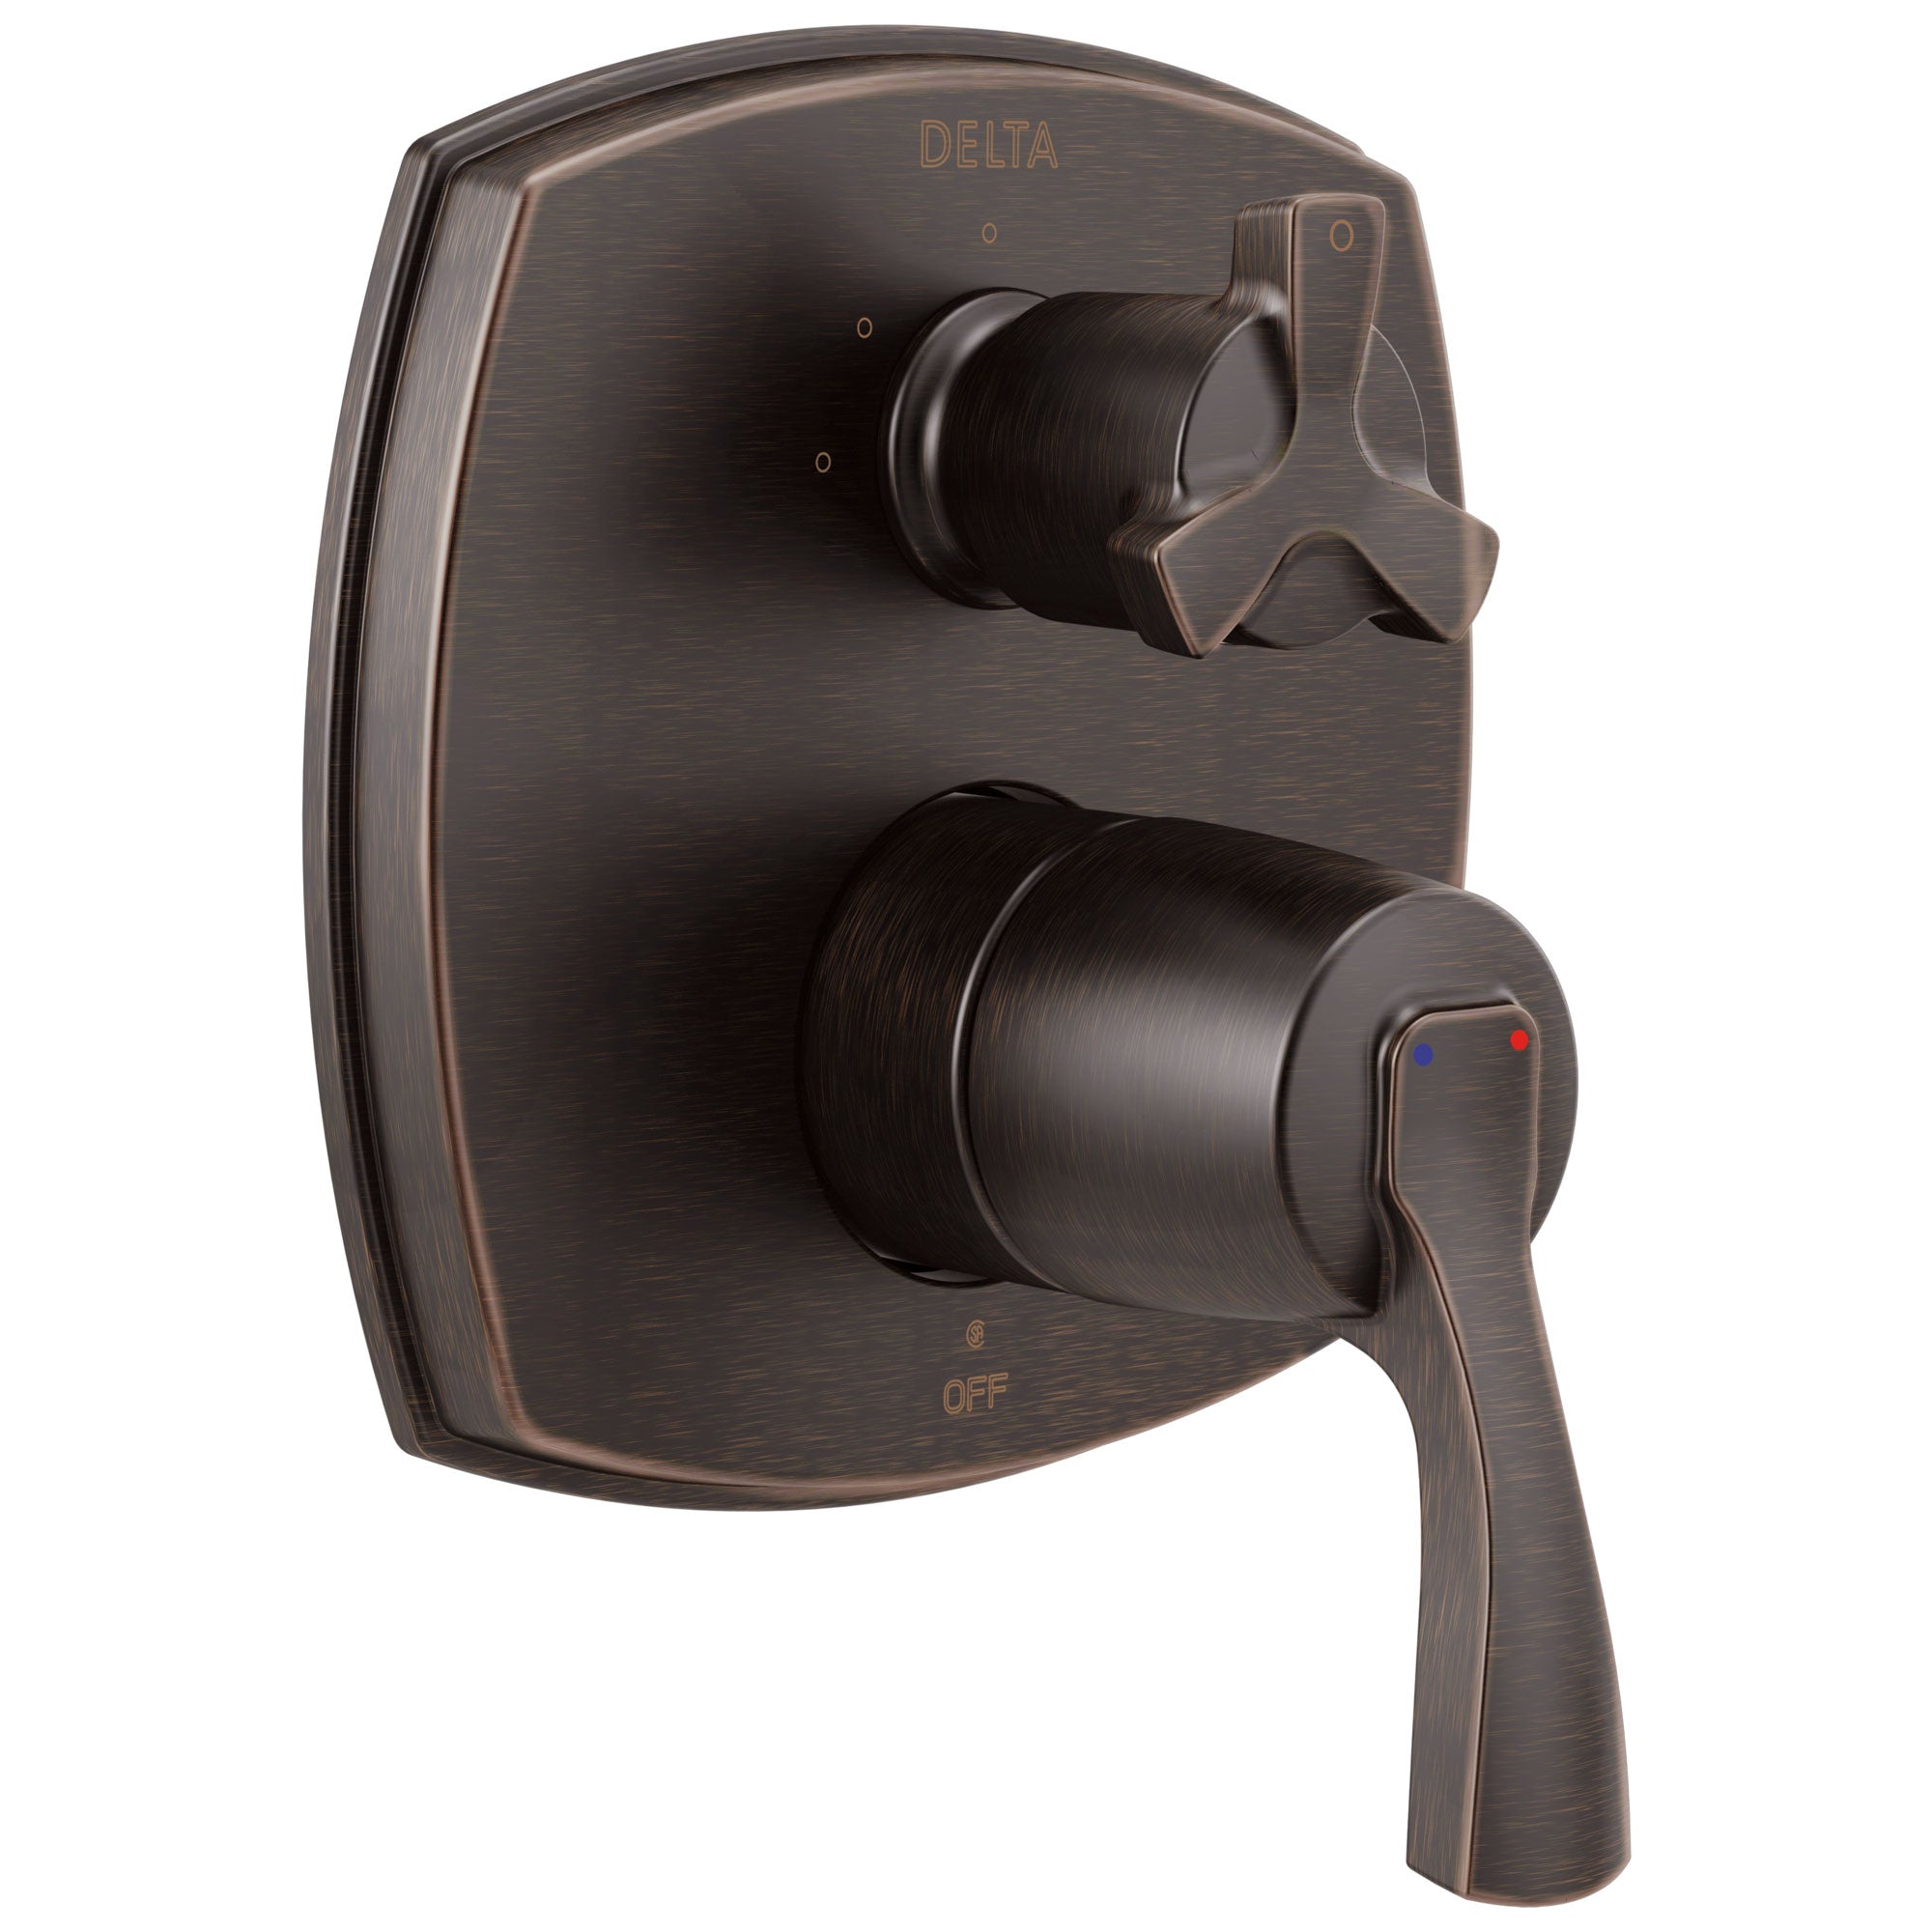 Delta Stryke Venetian Bronze Finish 14 Series Shower System Control with 3 Function Integrated Cross Handle Diverter Includes Valve and Handles D3197V